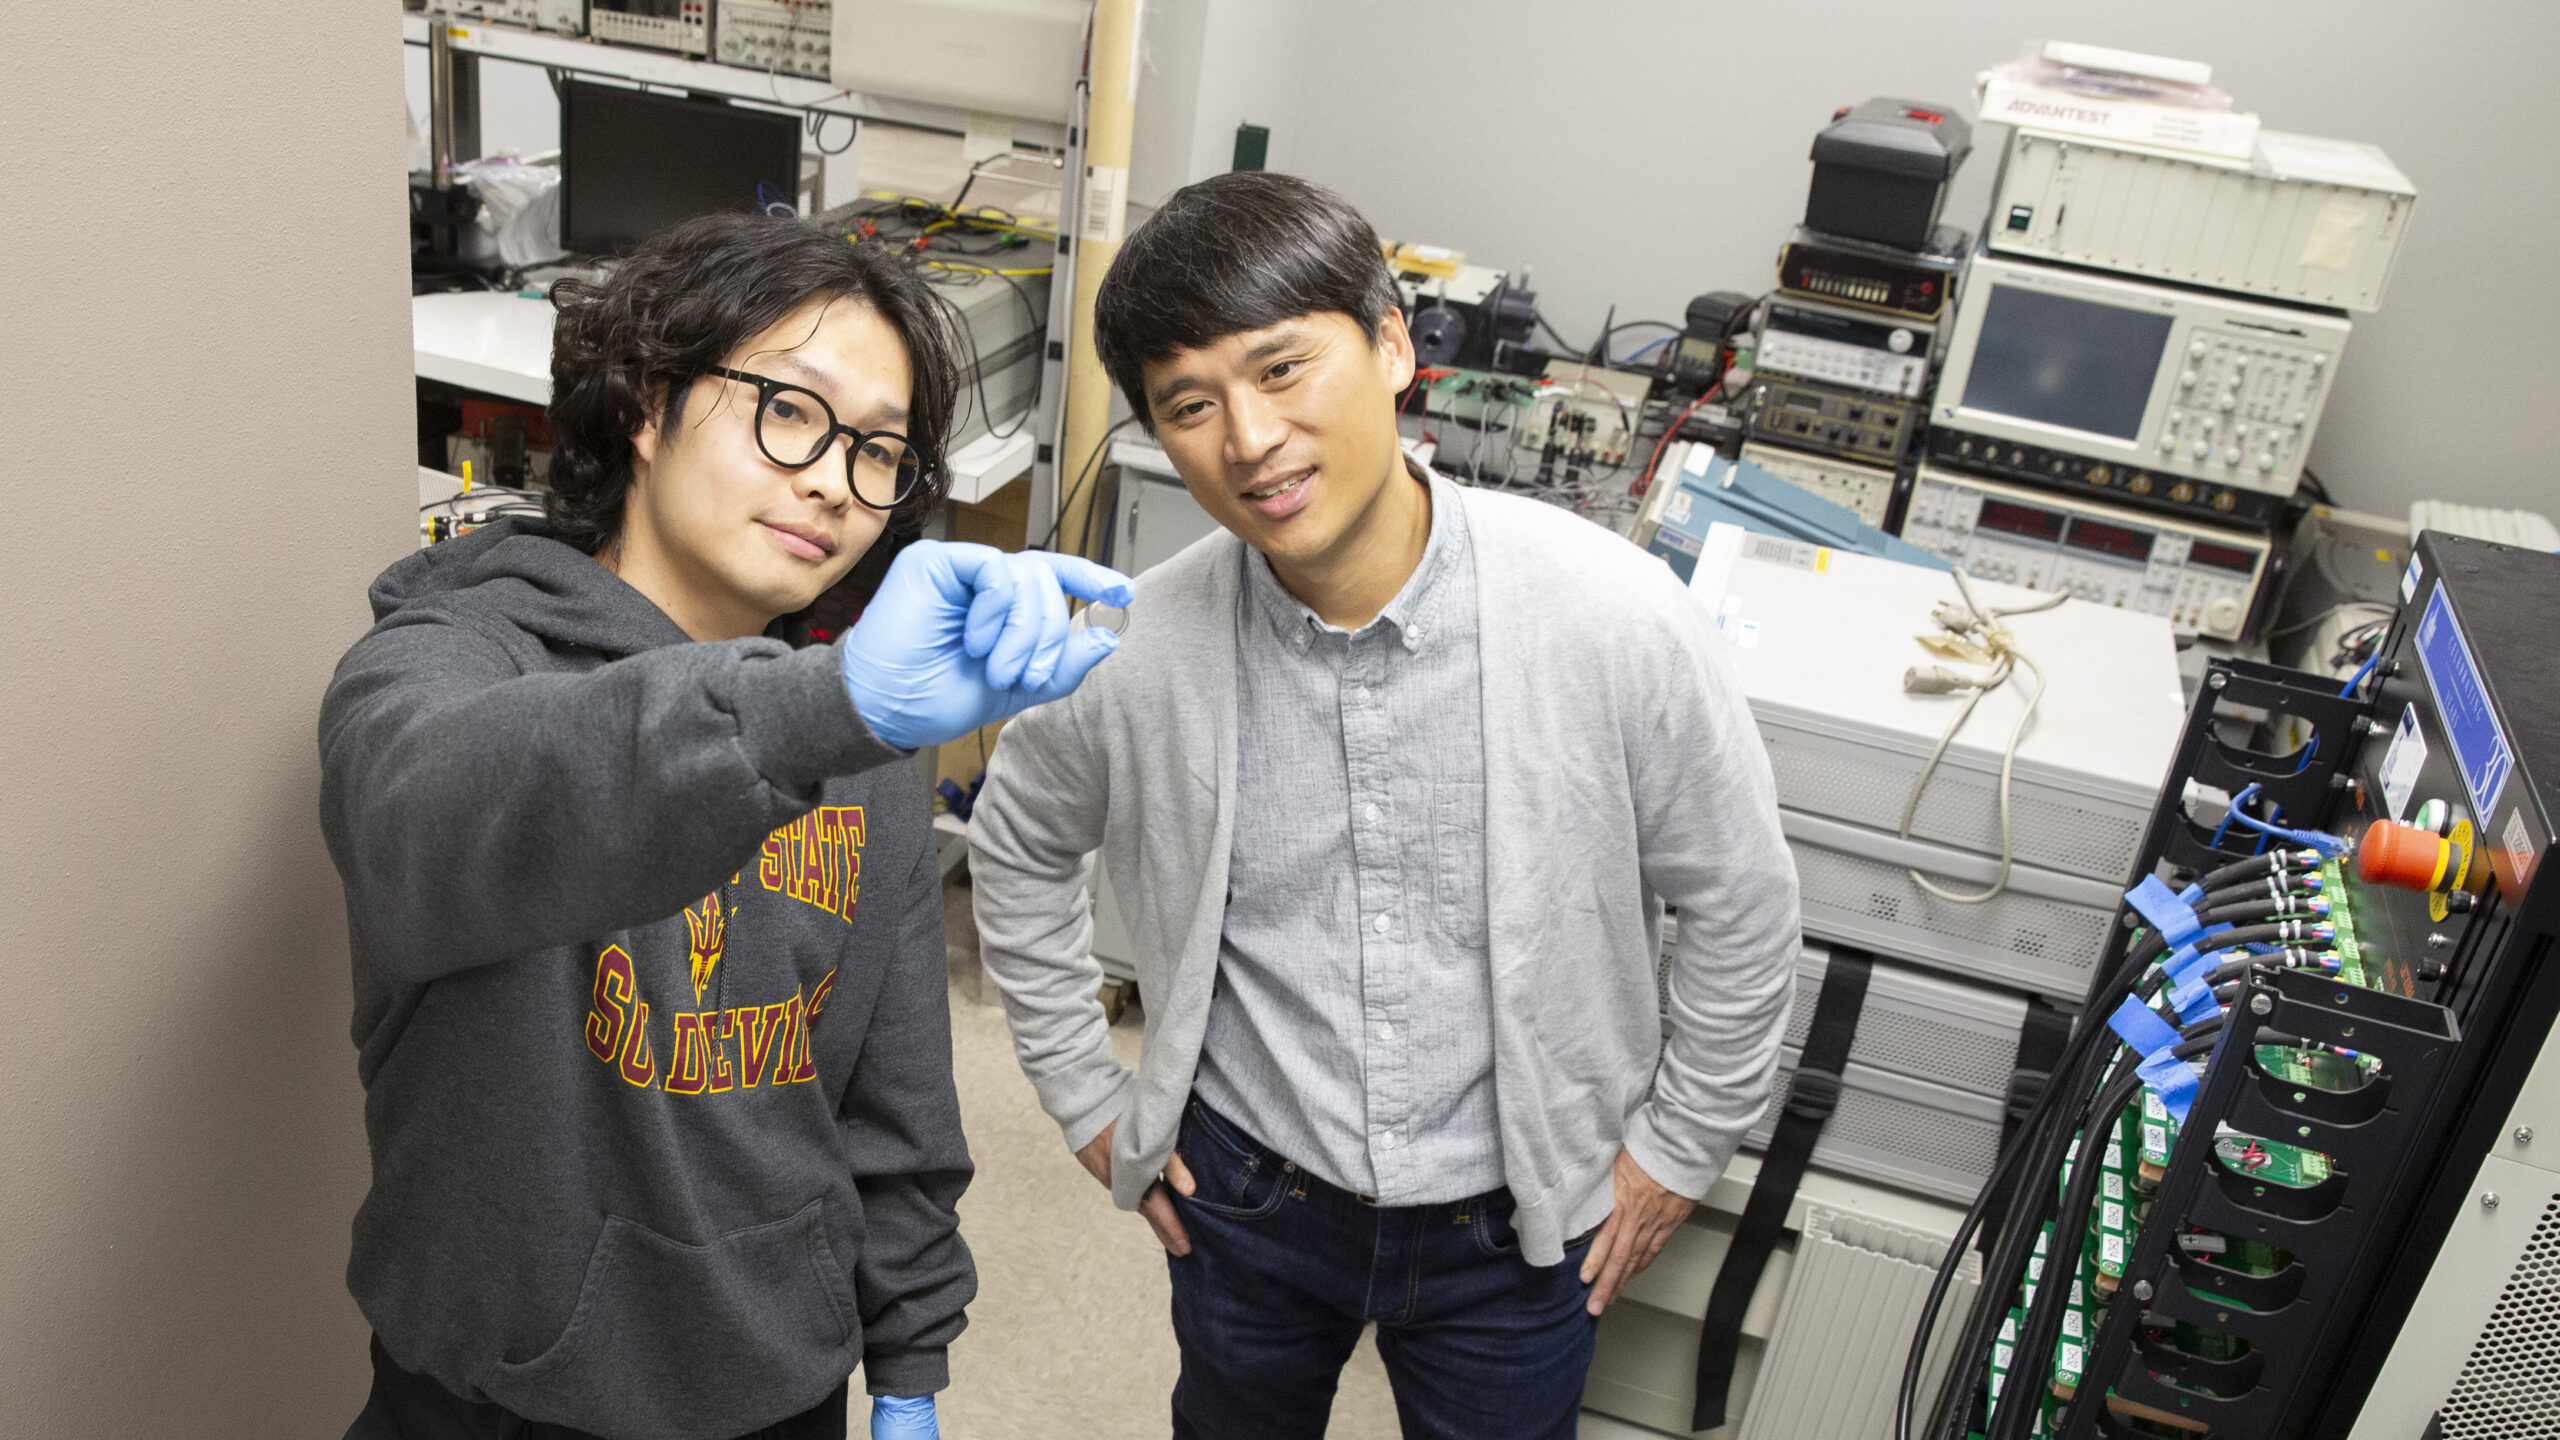 FURI student researcher Byung Gik Park researchers batter capacity and temperature associations with faculty mentor Yoon Hwa.